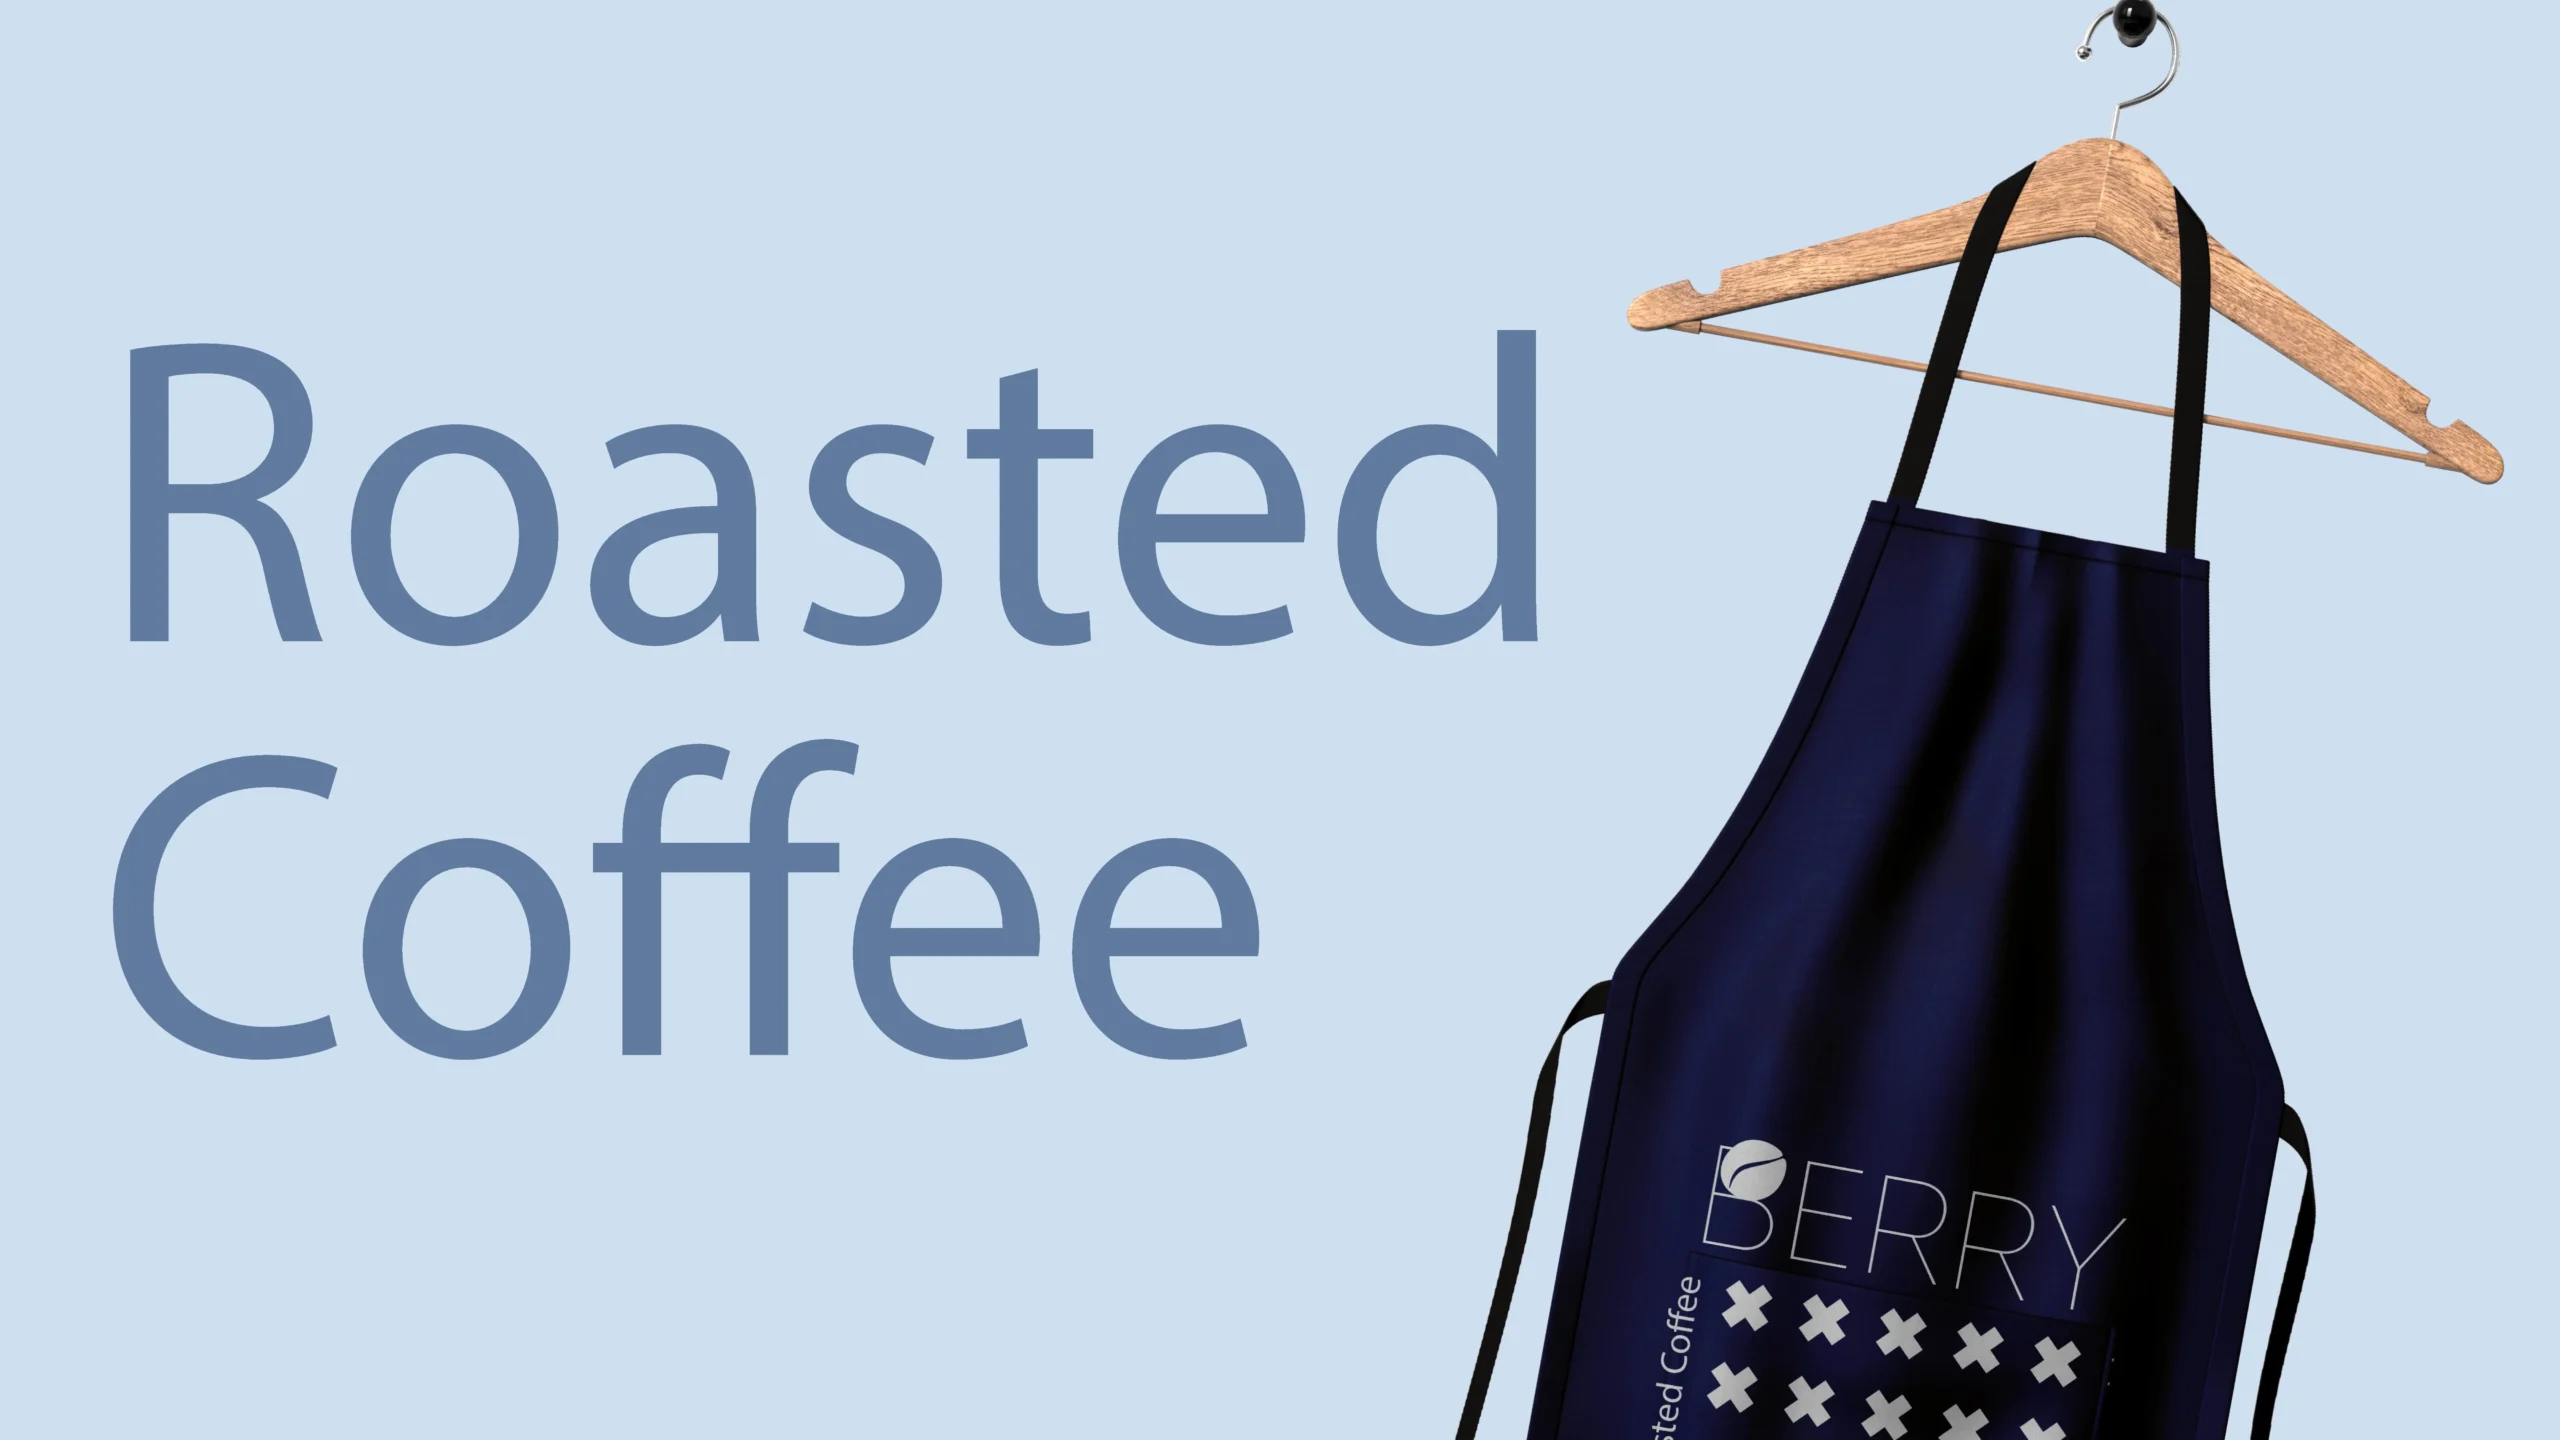 Sustainable packaging of Berry coffee products featuring the brand's distinctive logo.